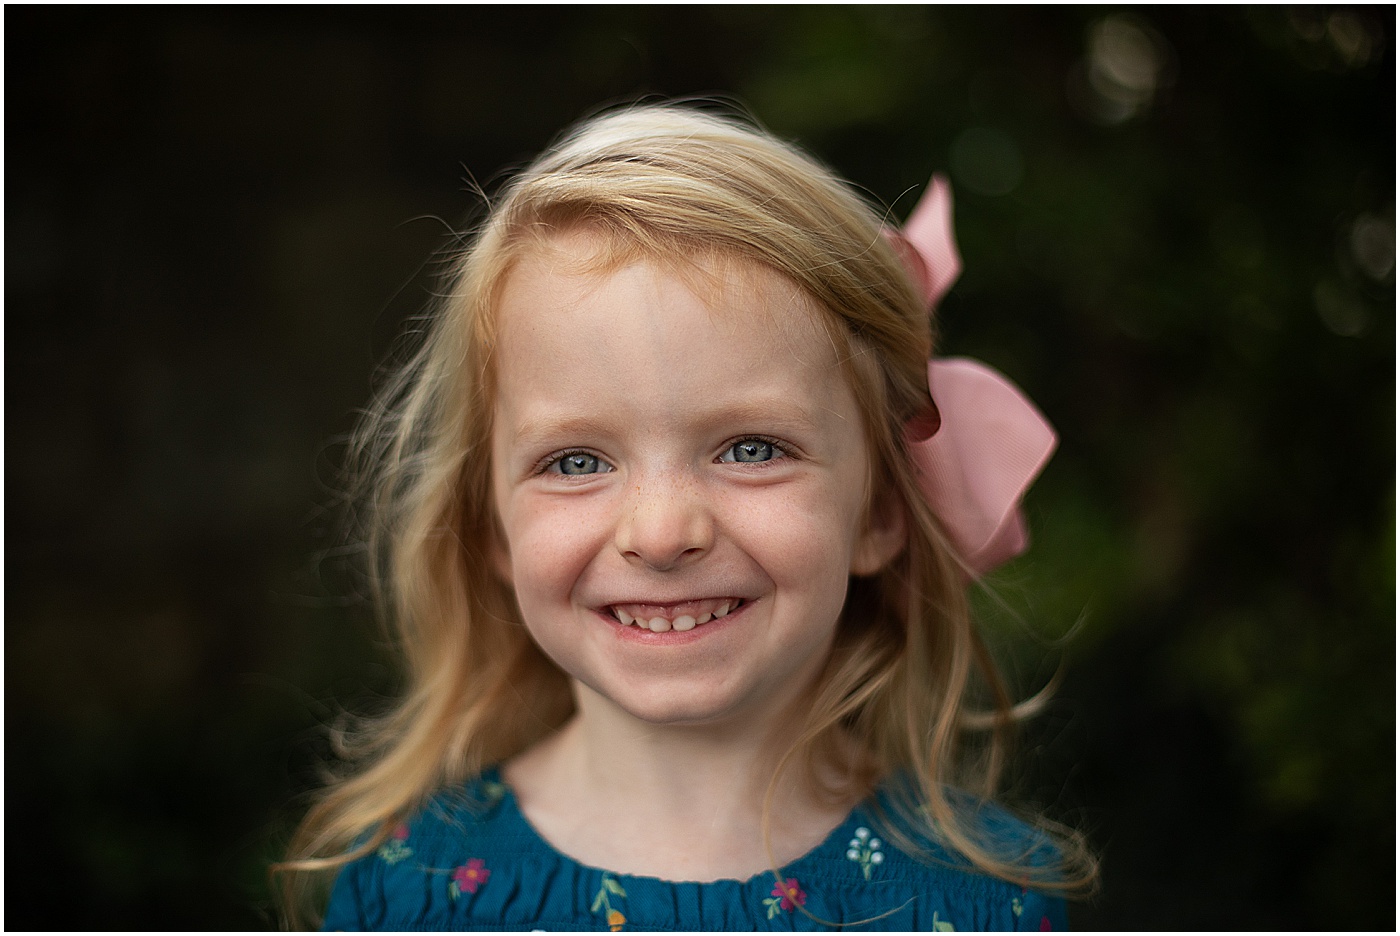 pre k student smiling during school portraits